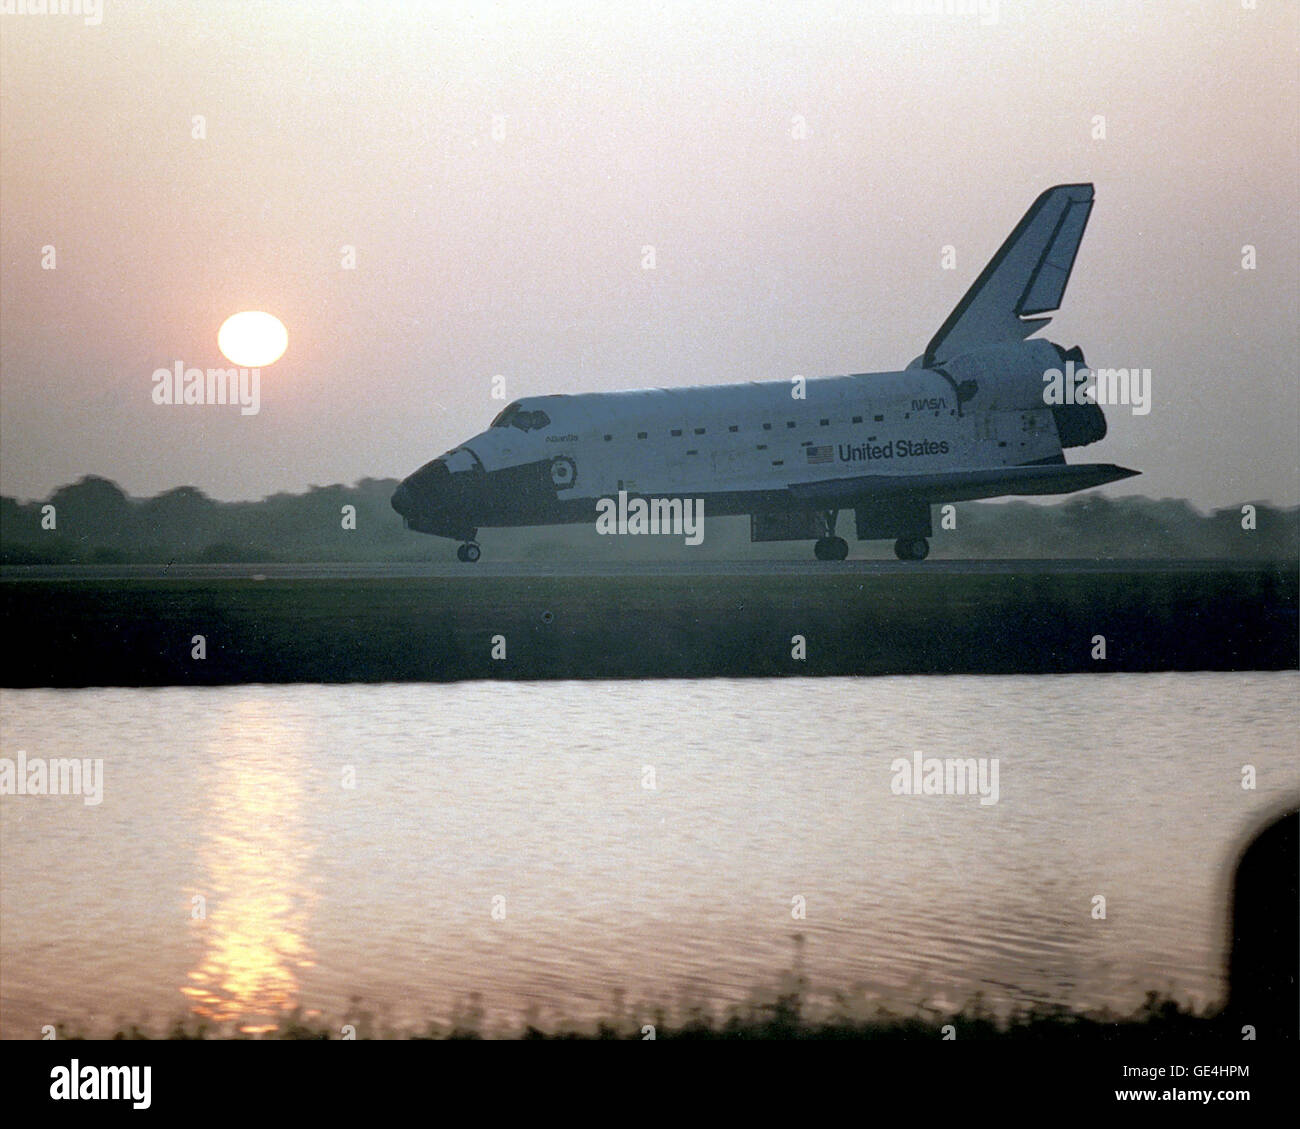 As the sun rises the morning of April 2, it casts a rosy glow over a steller performer, the orbiter Atlantis parked on Runway 33 of the Shuttle Landing Facility. Atlantis touched down at 6:23:6 a.m. EST, completing a highly successful flight that was extended by a day to further the scientific research being performed on the Atmospheric Laboratory for Applications and Science-1 (ATLAS-1) payload. On board OV-104 for Mission STS-45 was a crew of seven.   Image # : 92PC-0724 Stock Photo